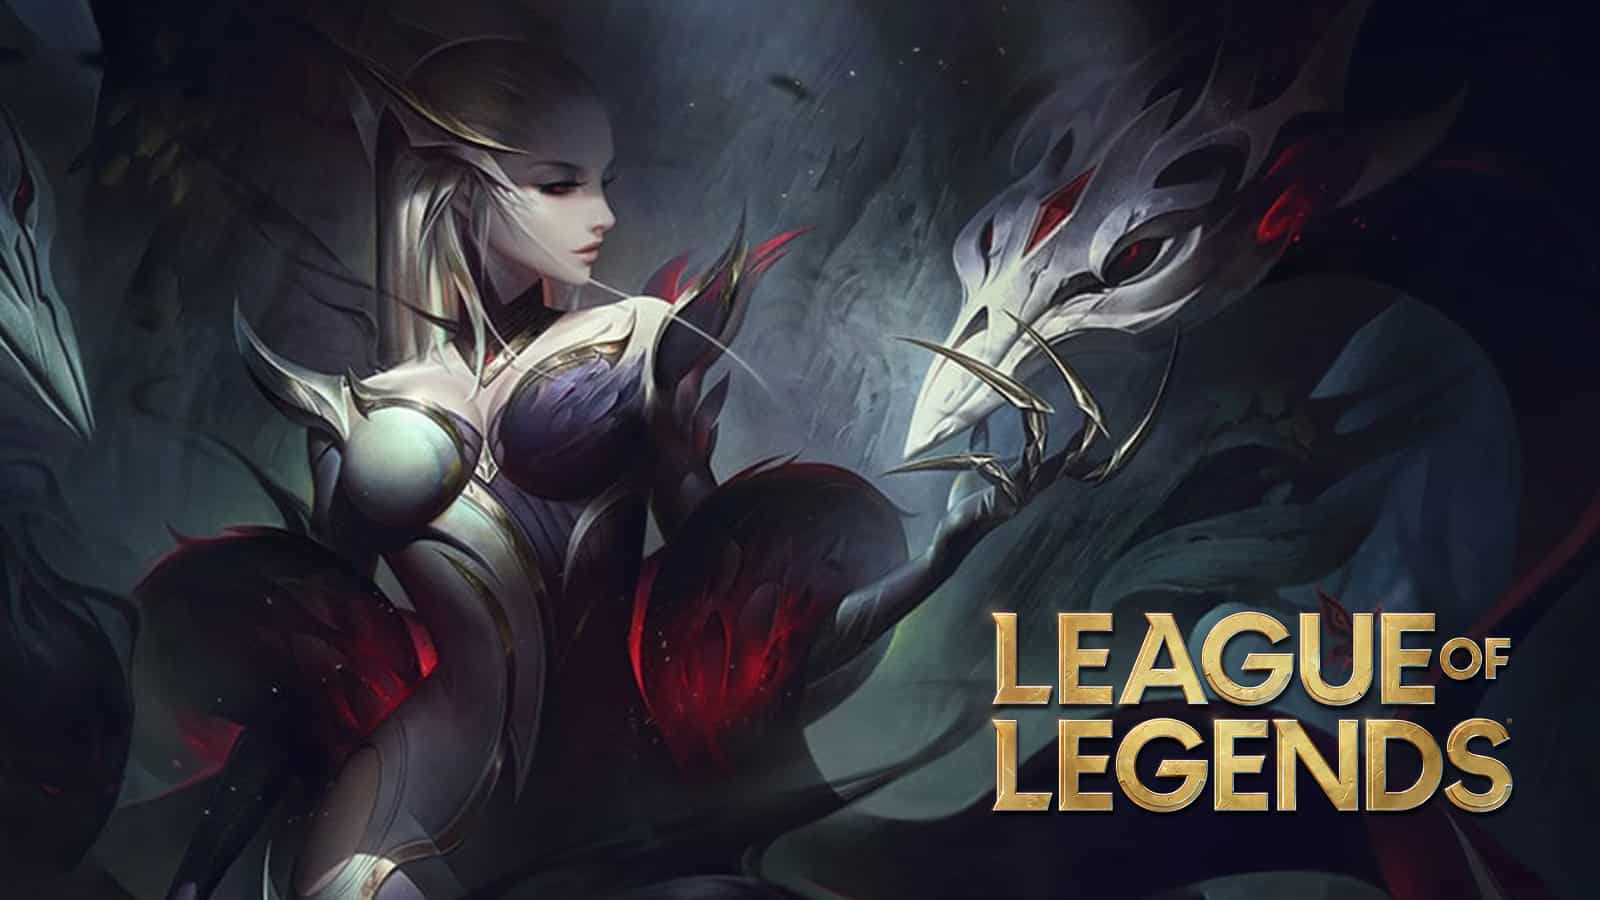 Prime Gaming And Riot Games Extend Deal To Give 'League Of Legends' Players  Free RP And Skins